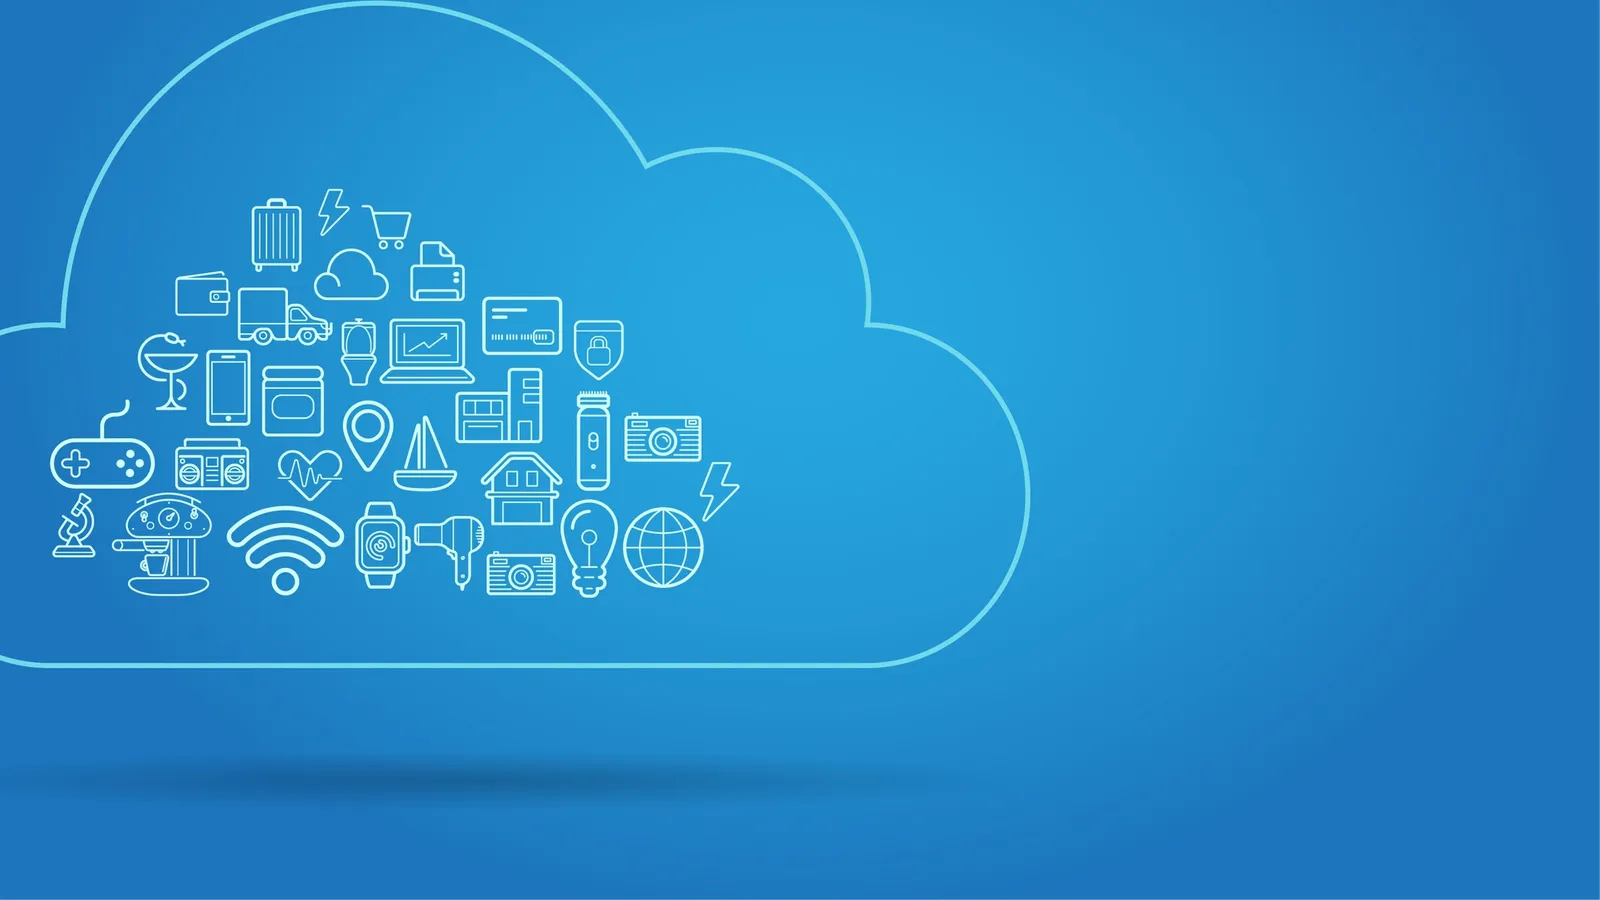 What to do with legacy apps that can’t migrate to the cloud